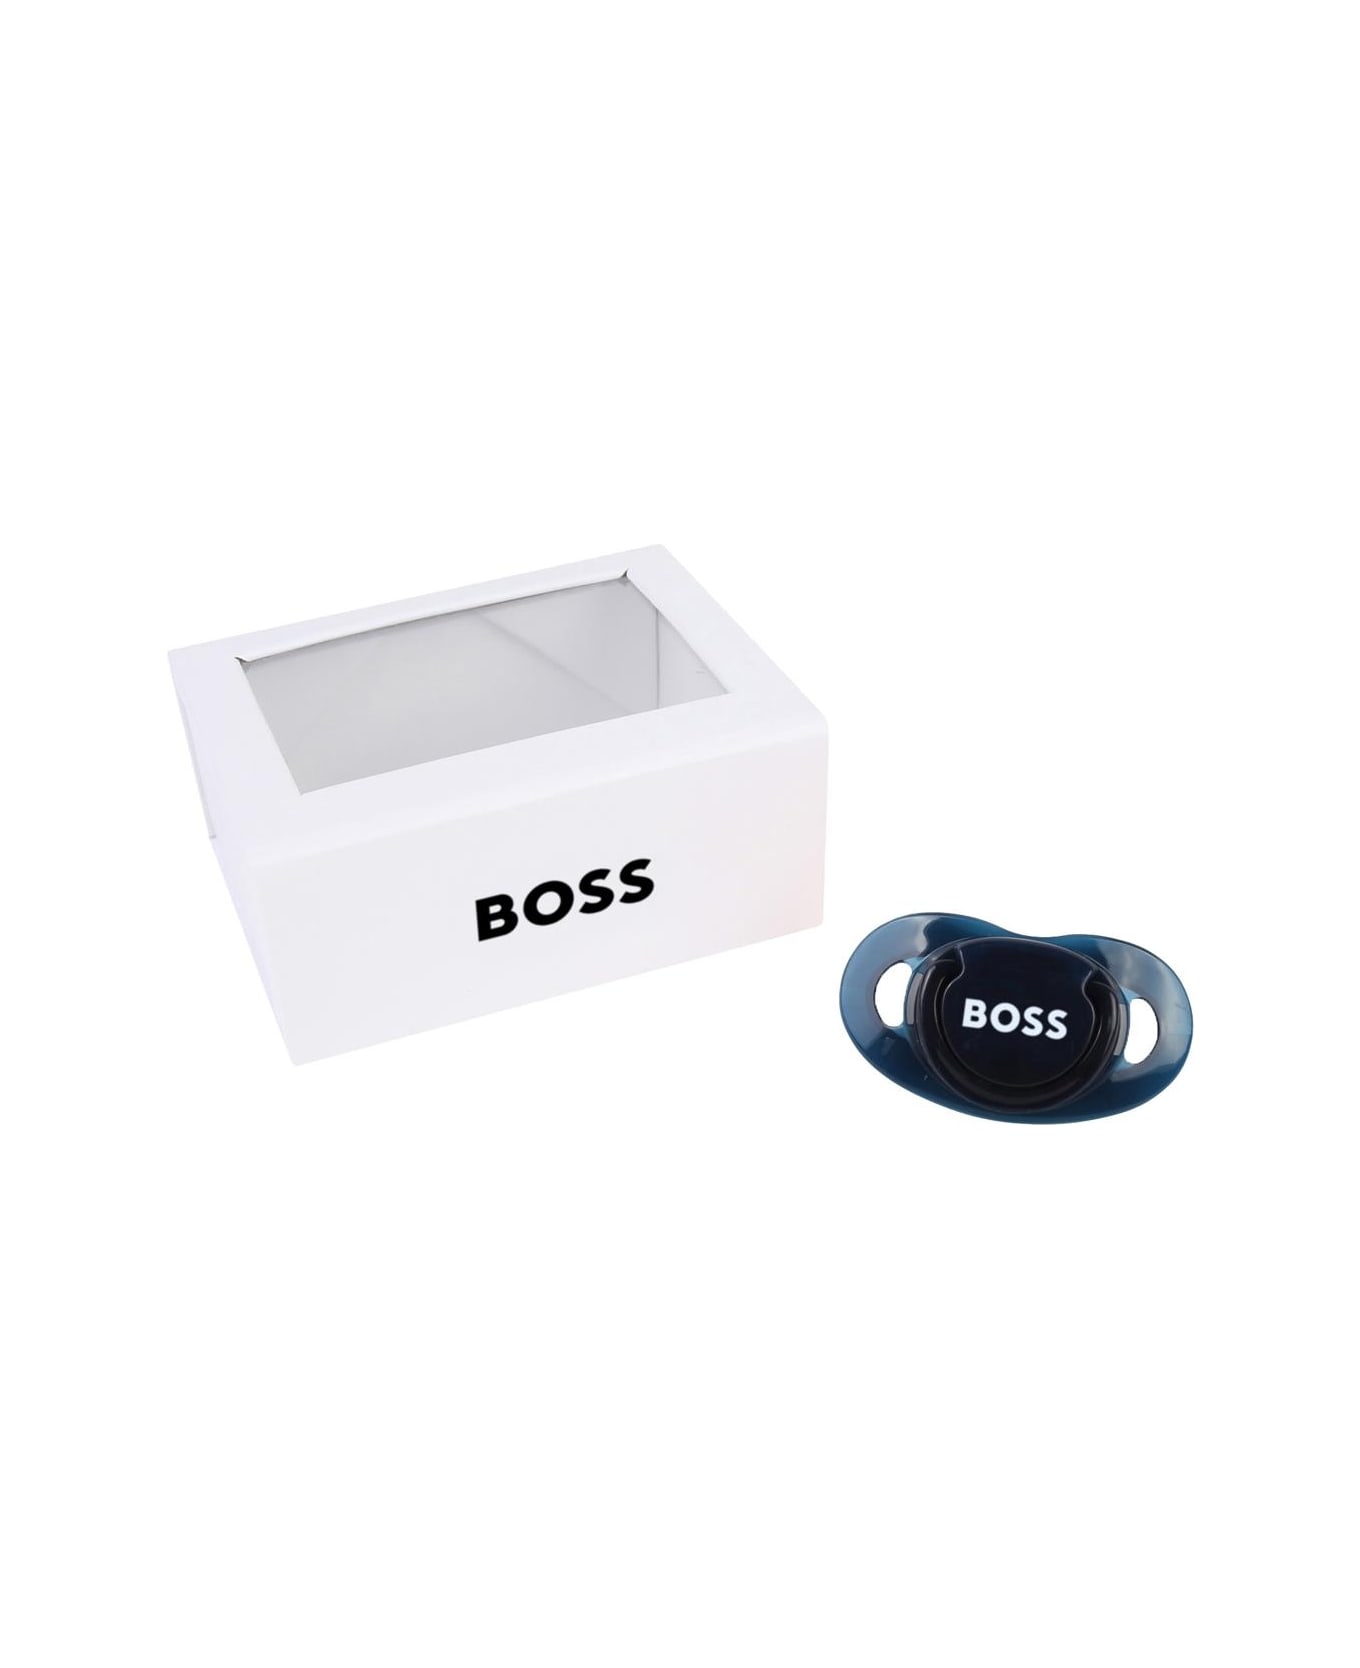 Hugo Boss Pacifier With Print - Blue アクセサリー＆ギフト